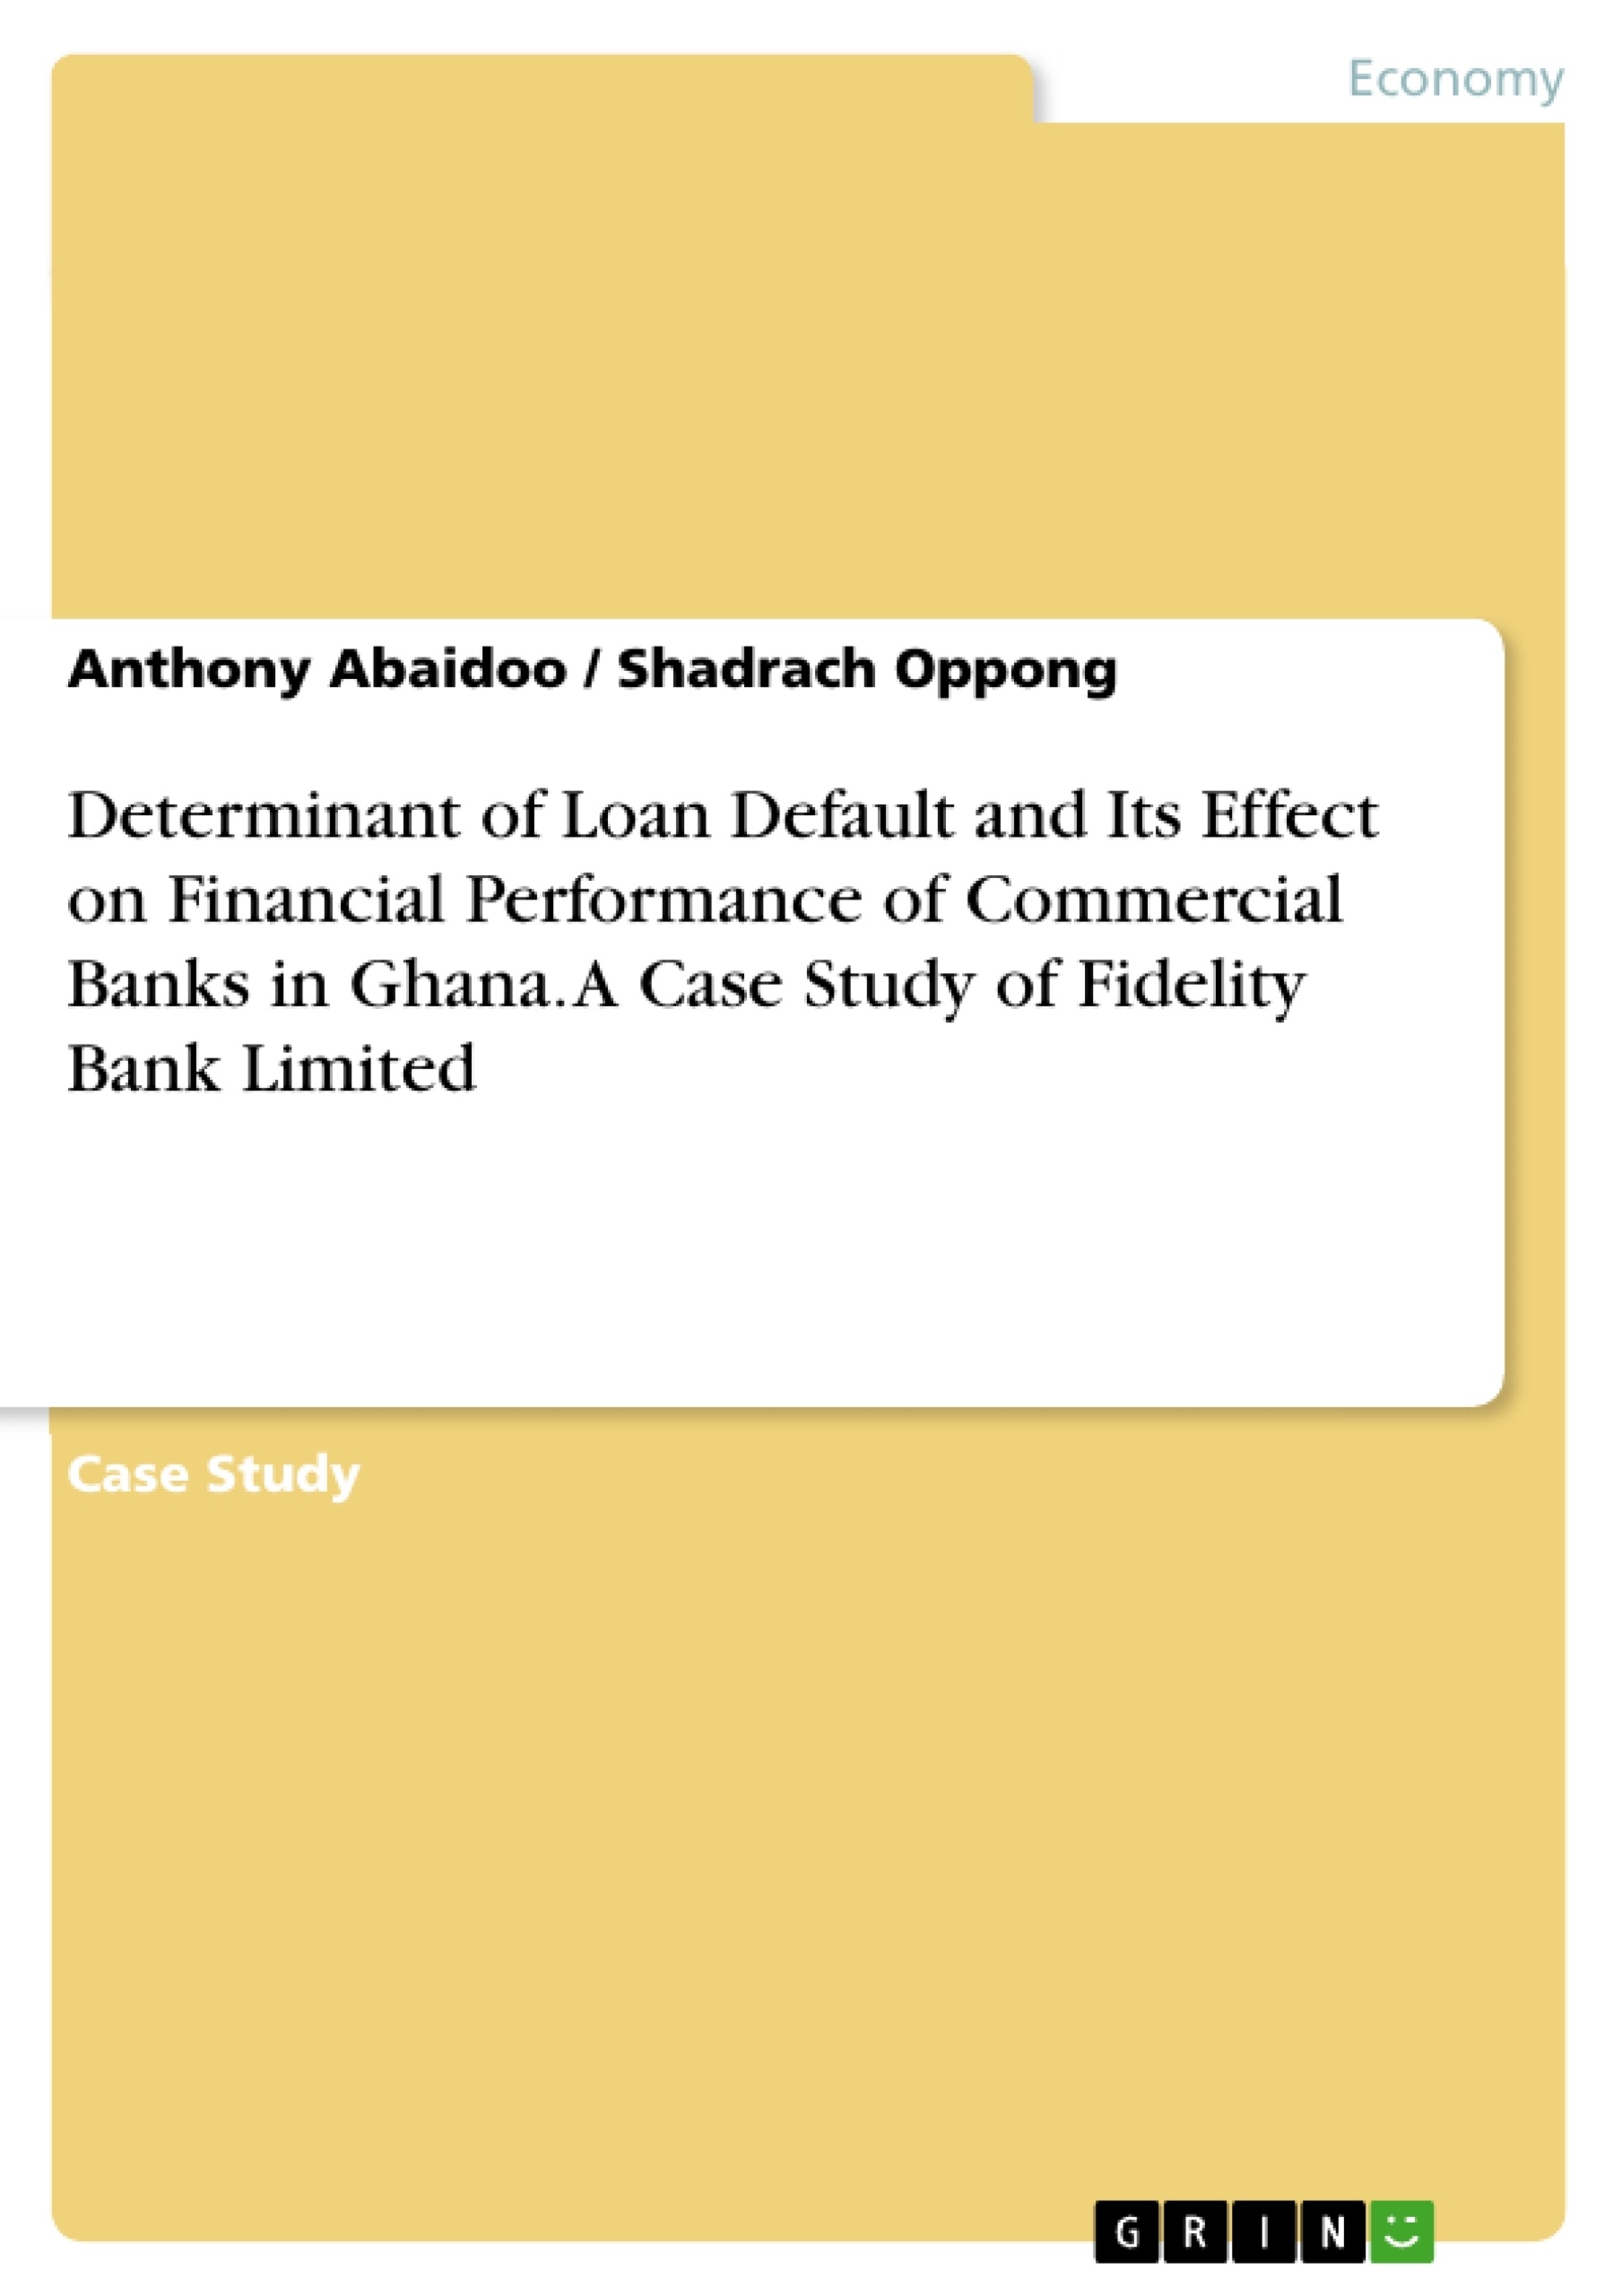 Title: Determinant of Loan Default and Its Effect on Financial Performance of Commercial Banks in Ghana. A Case Study of Fidelity Bank Limited